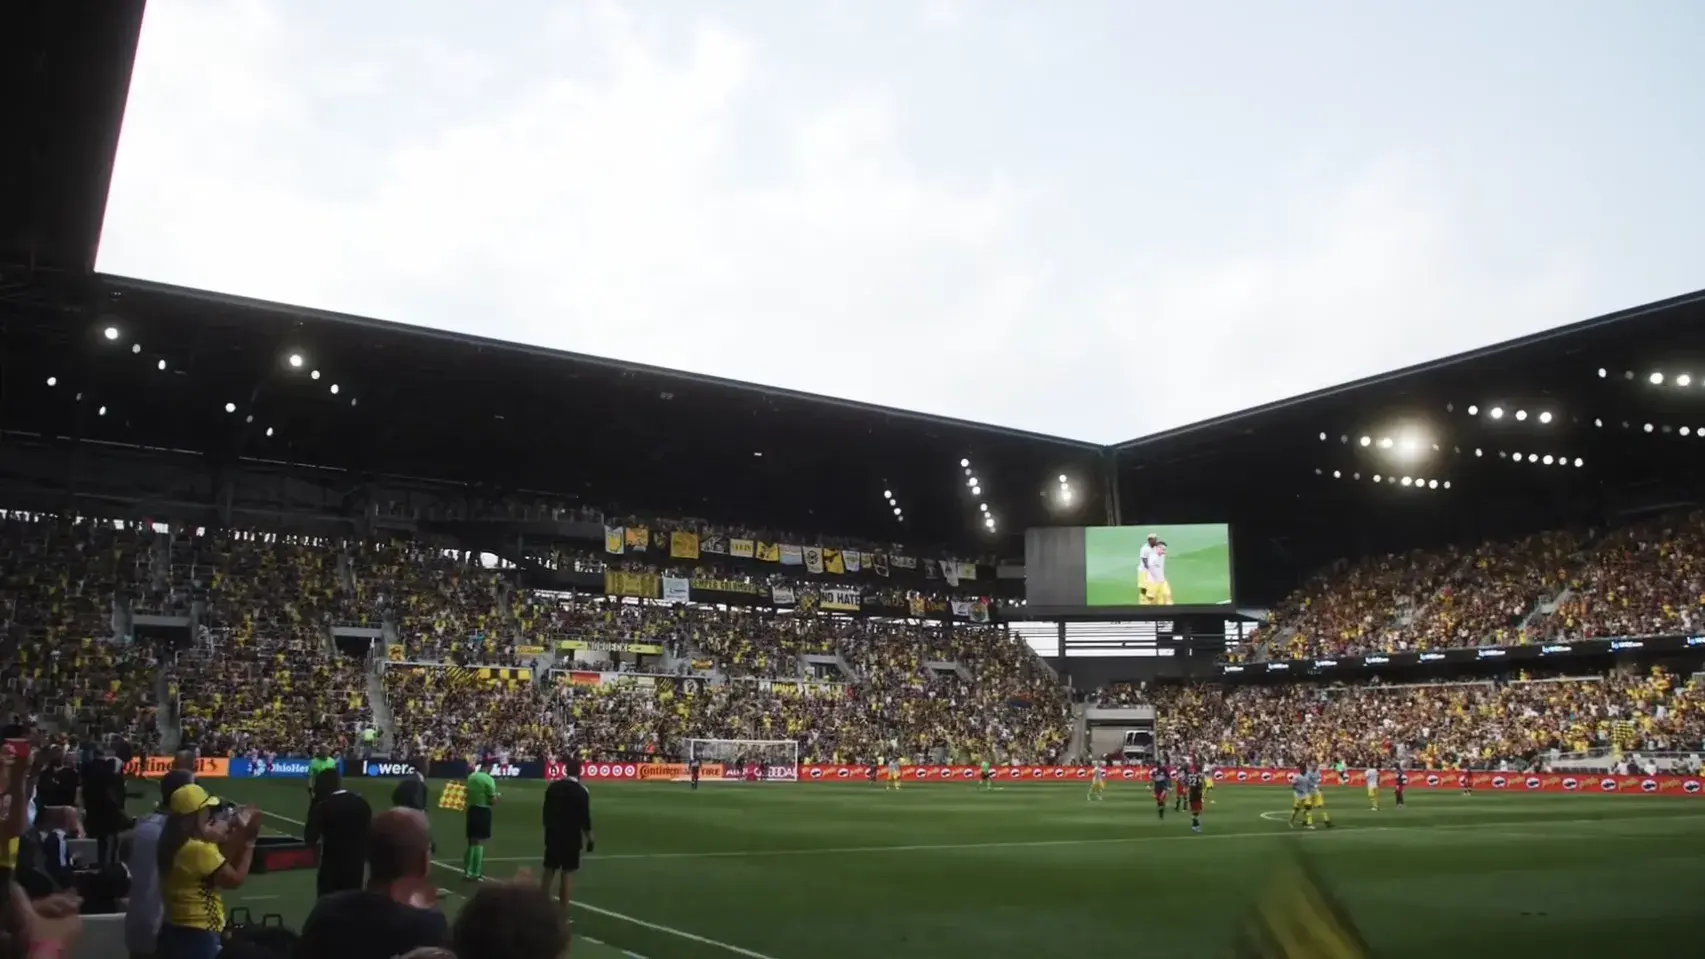 Columbus crew stadium from the inside showing fans in the stands